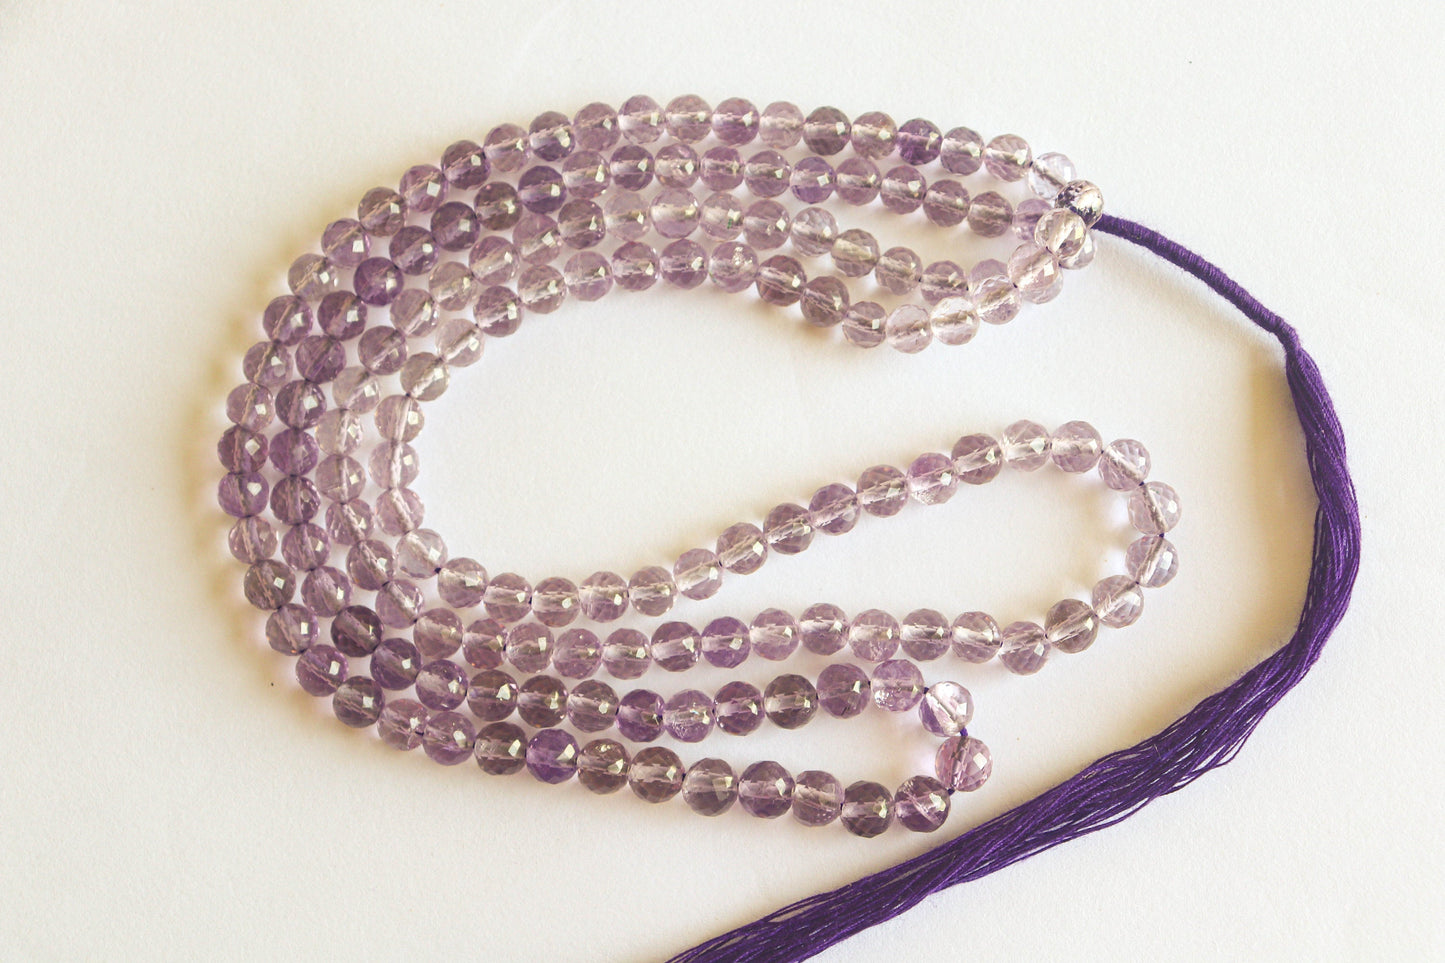 Amethyst Gemstone Faceted Balls | 16 inch String | 6mm | 76 Pieces | Natural Gemstone Beads for jewelry making Beadsforyourjewelry